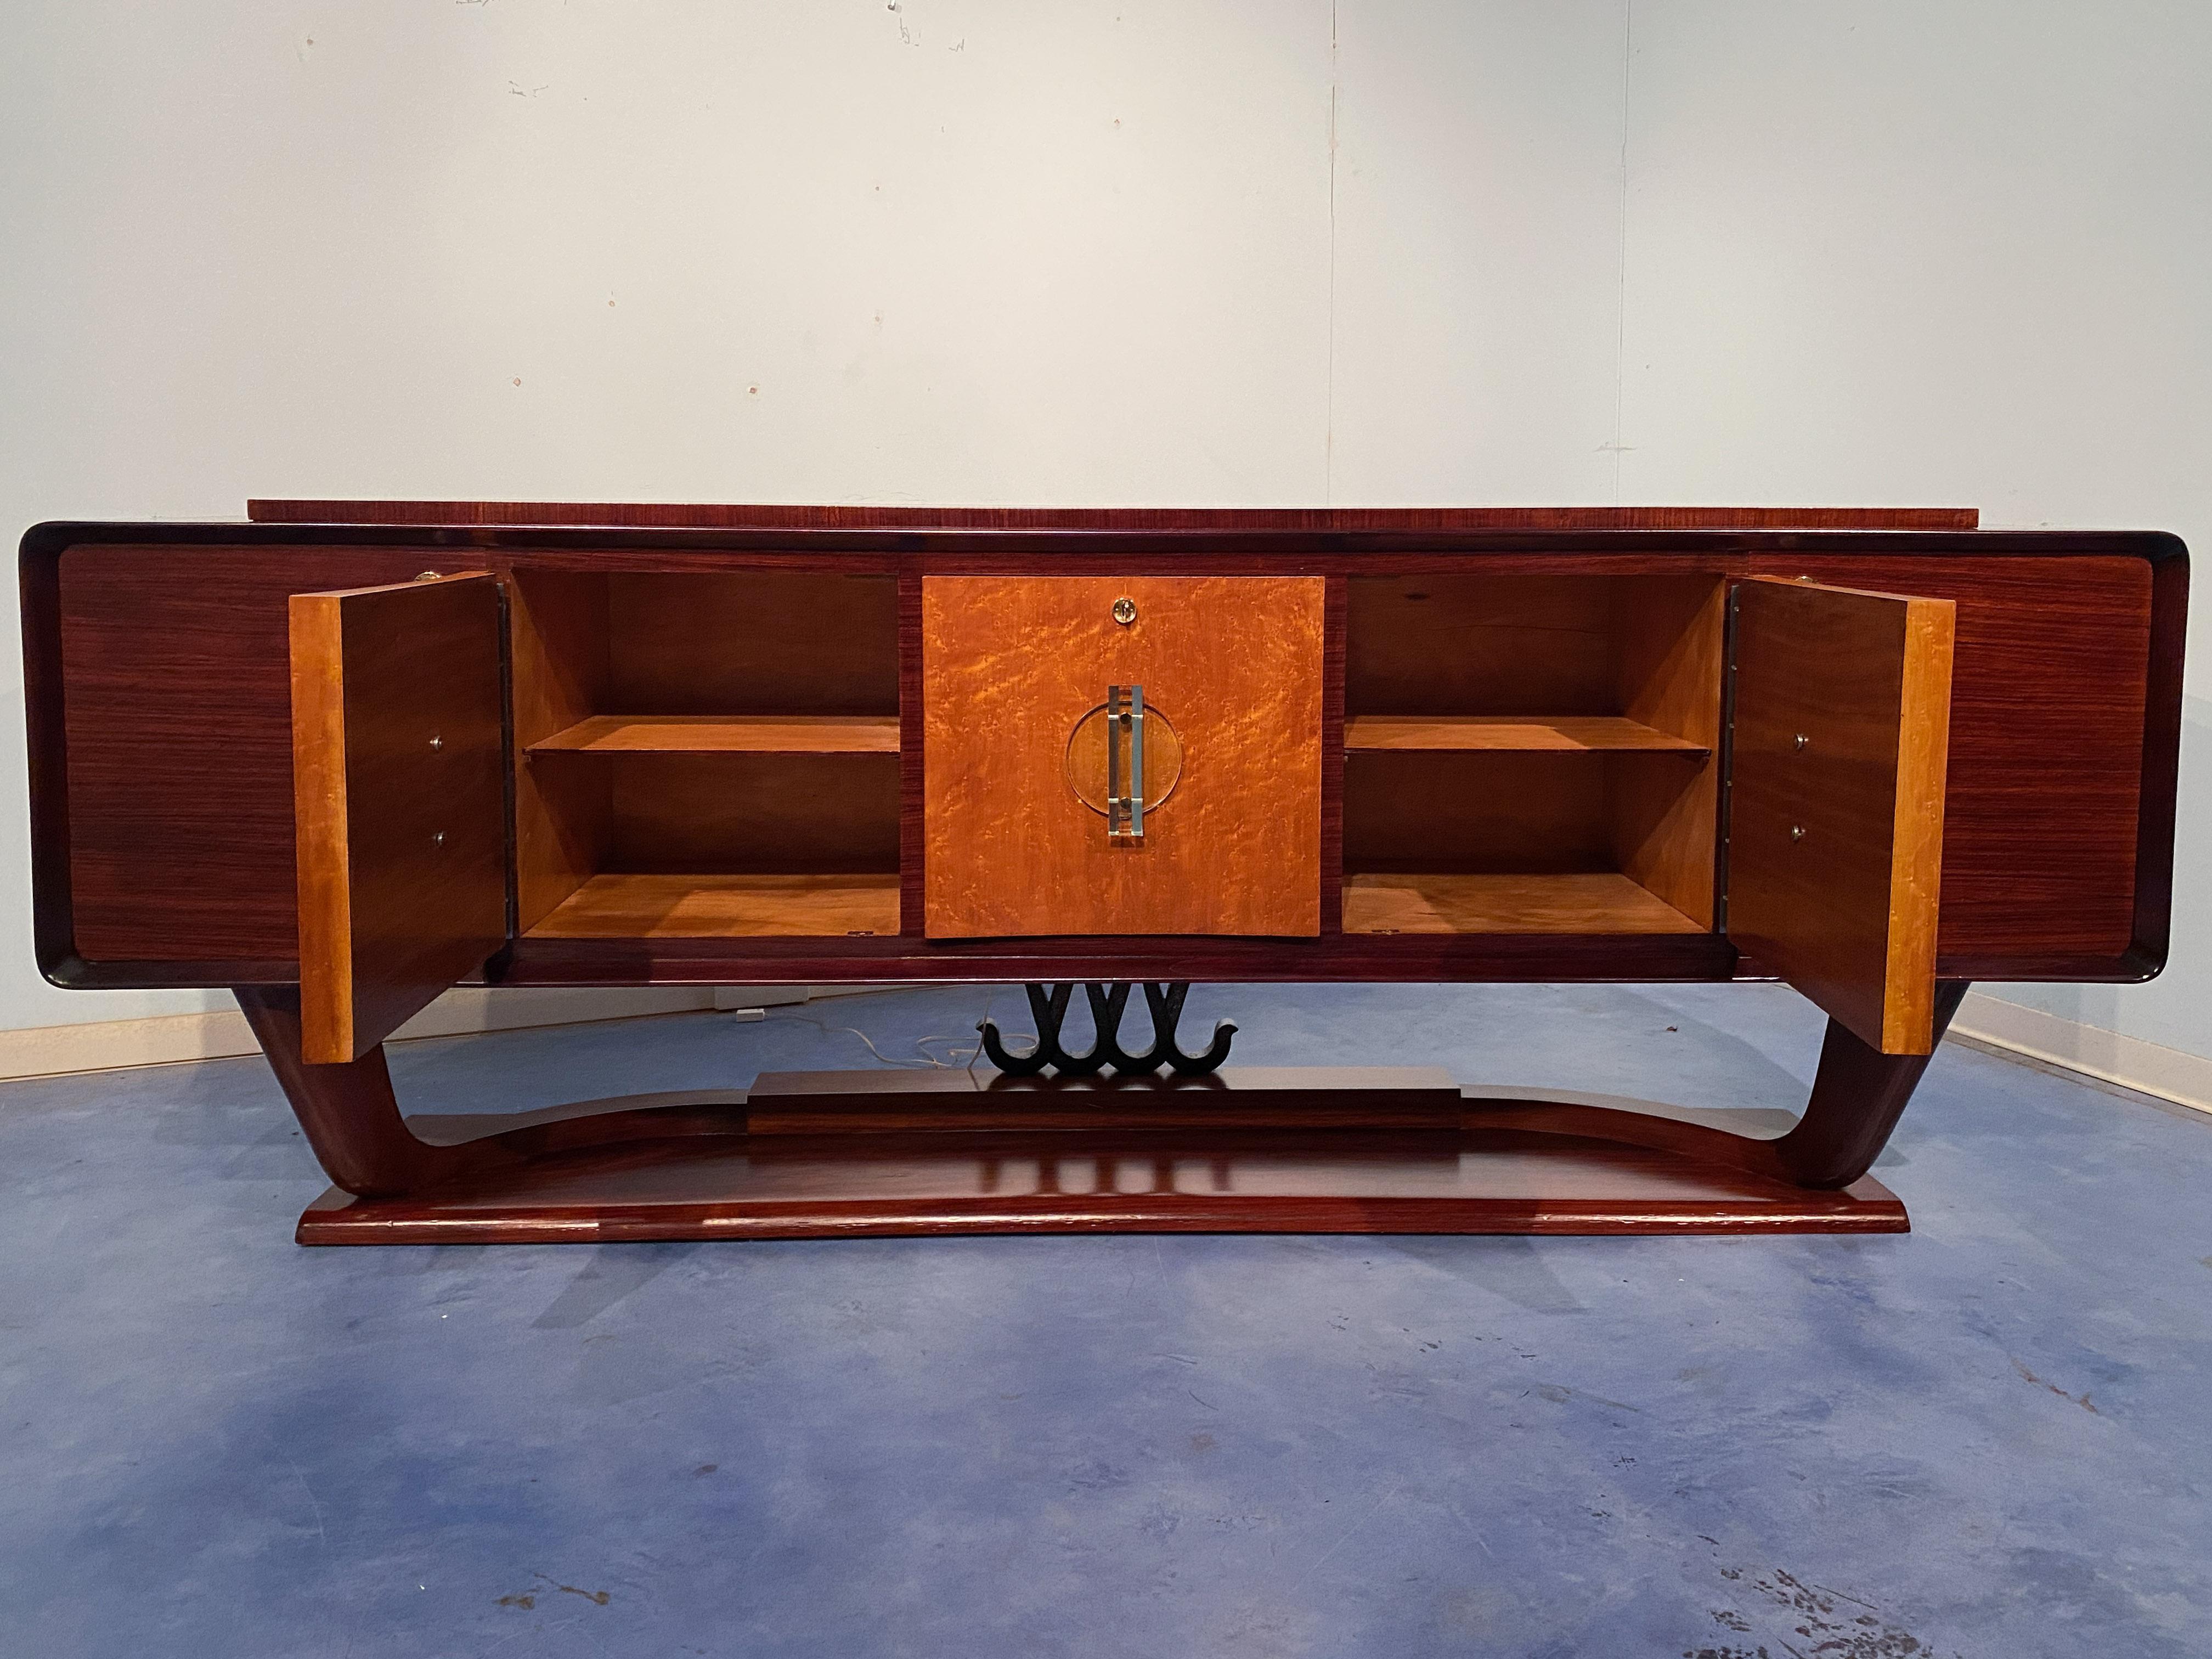 Italian Art Deco Sideboard with Bar Cabinet Attributed to Osvaldo Borsani, 1940s For Sale 11